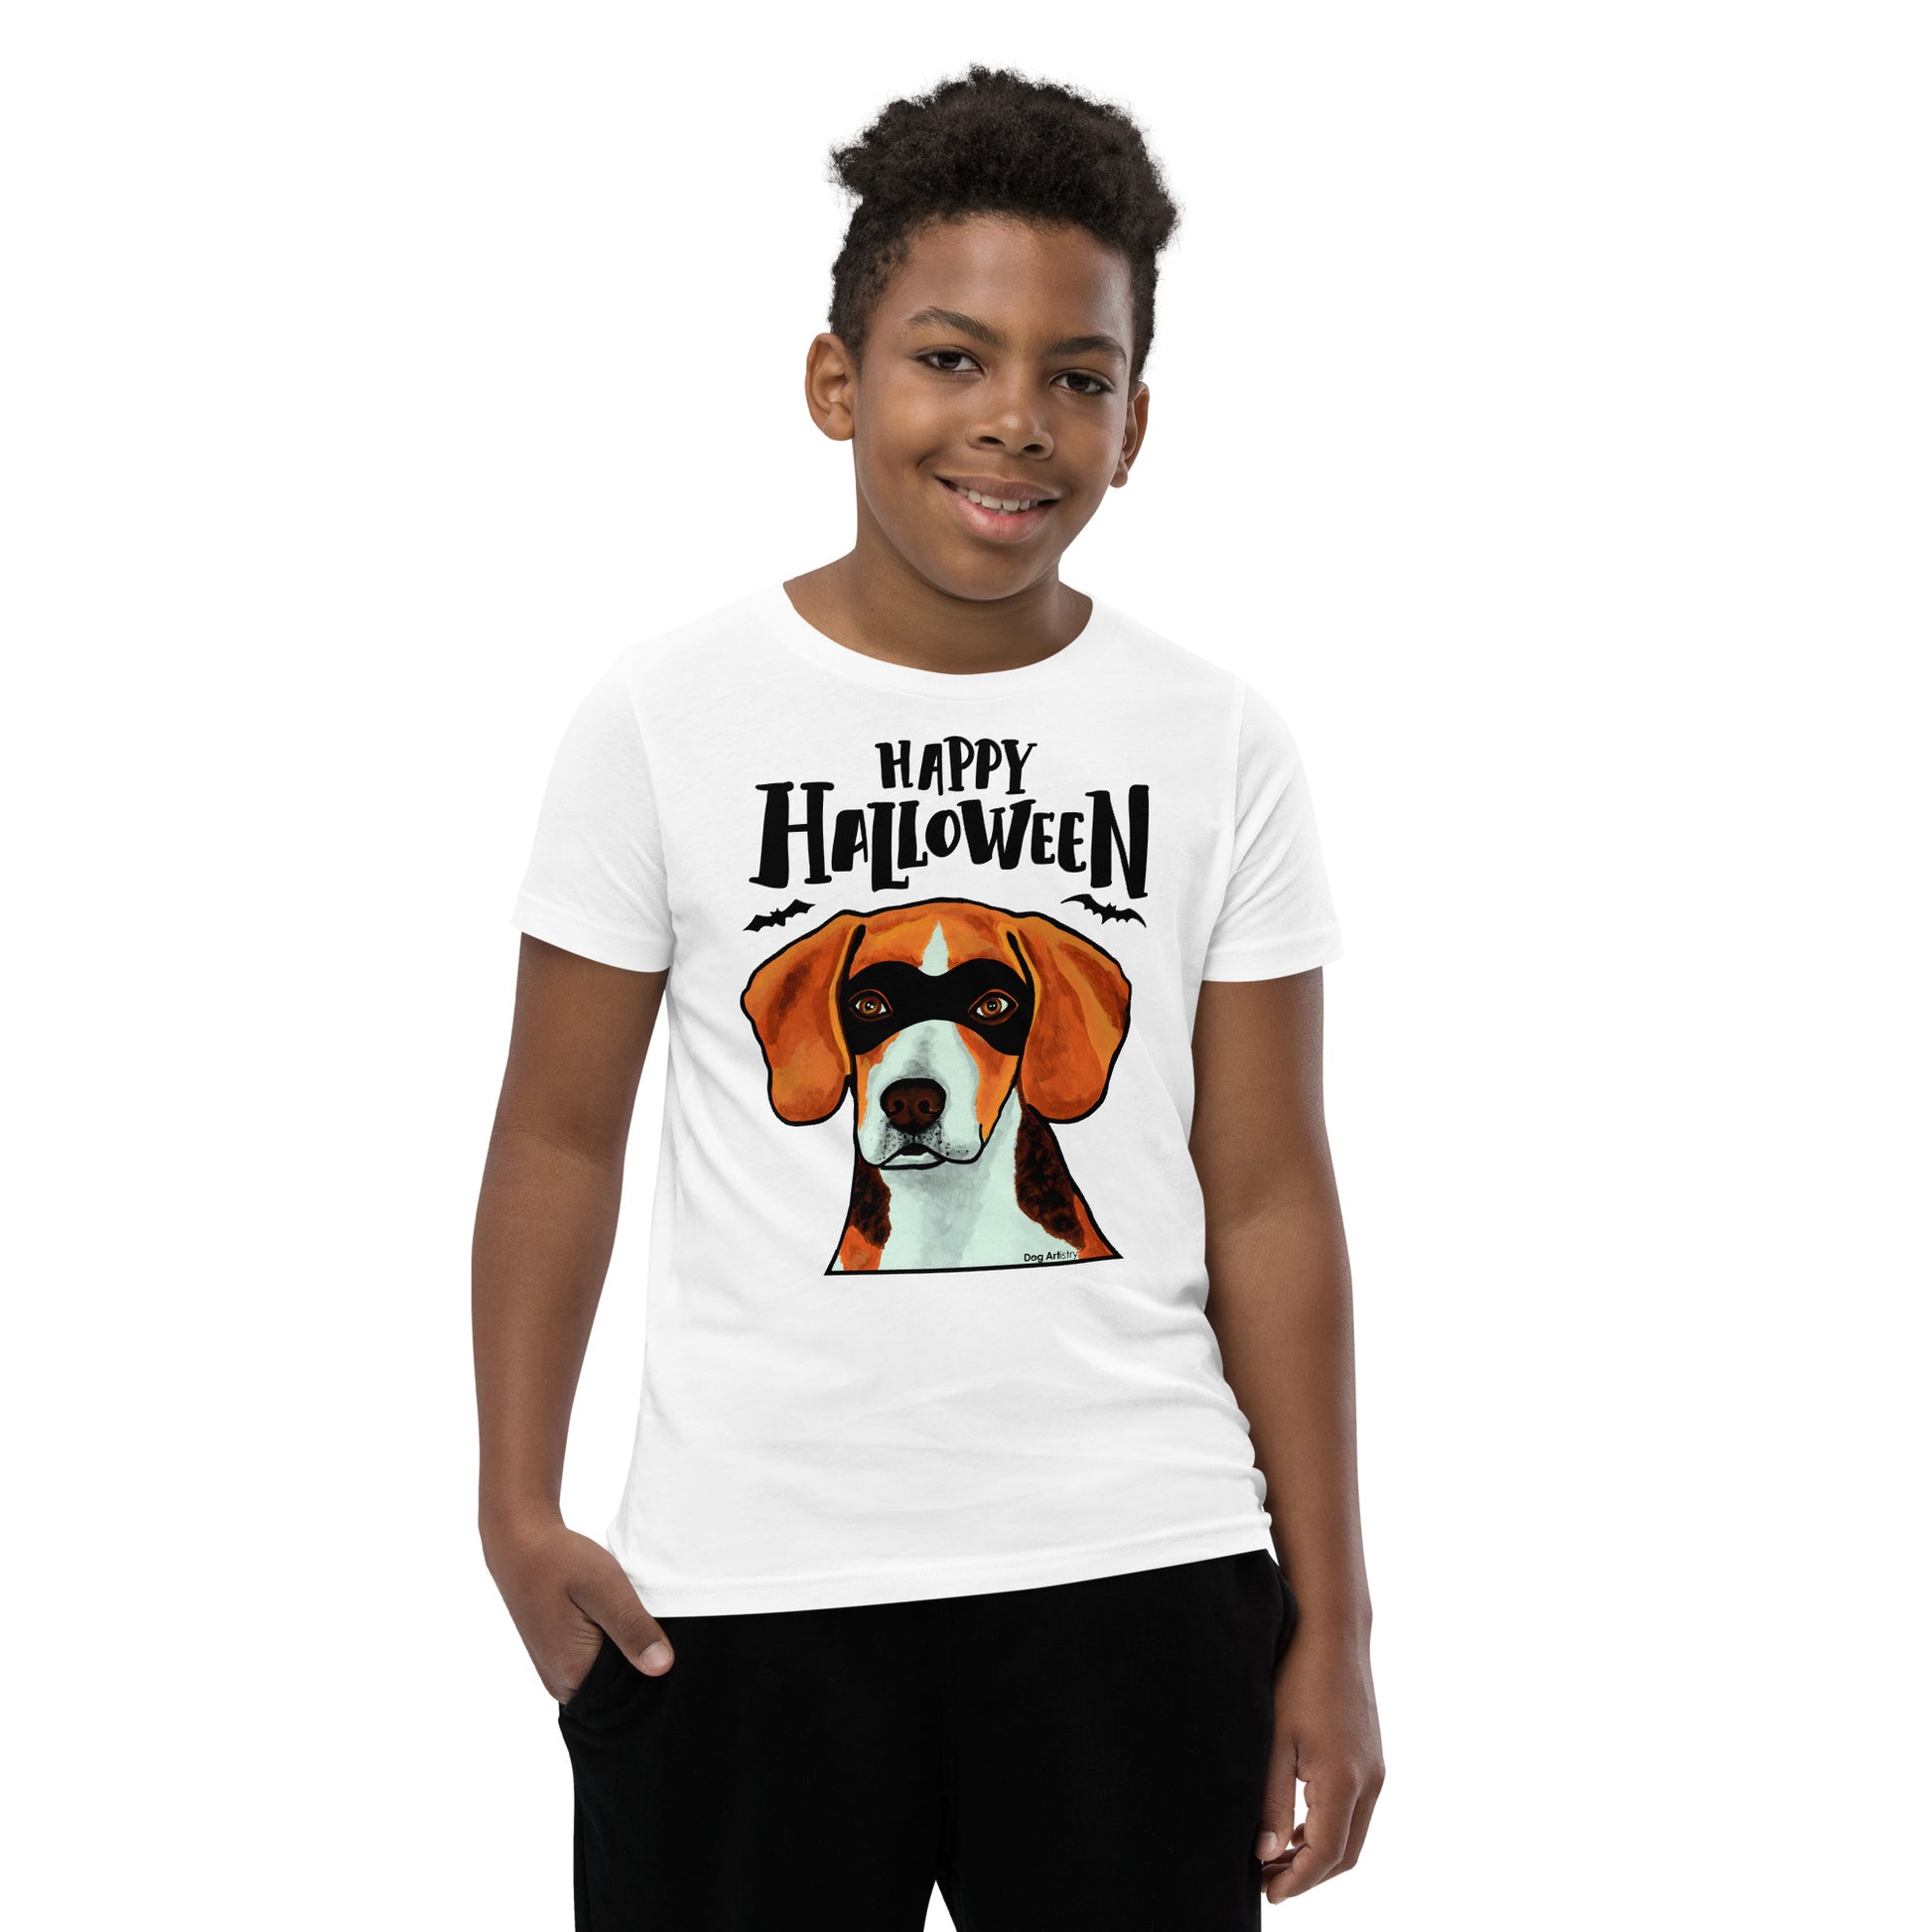 Funny Happy Halloween Beagle wearing mask youth white t-shirt by Dog Artistry.